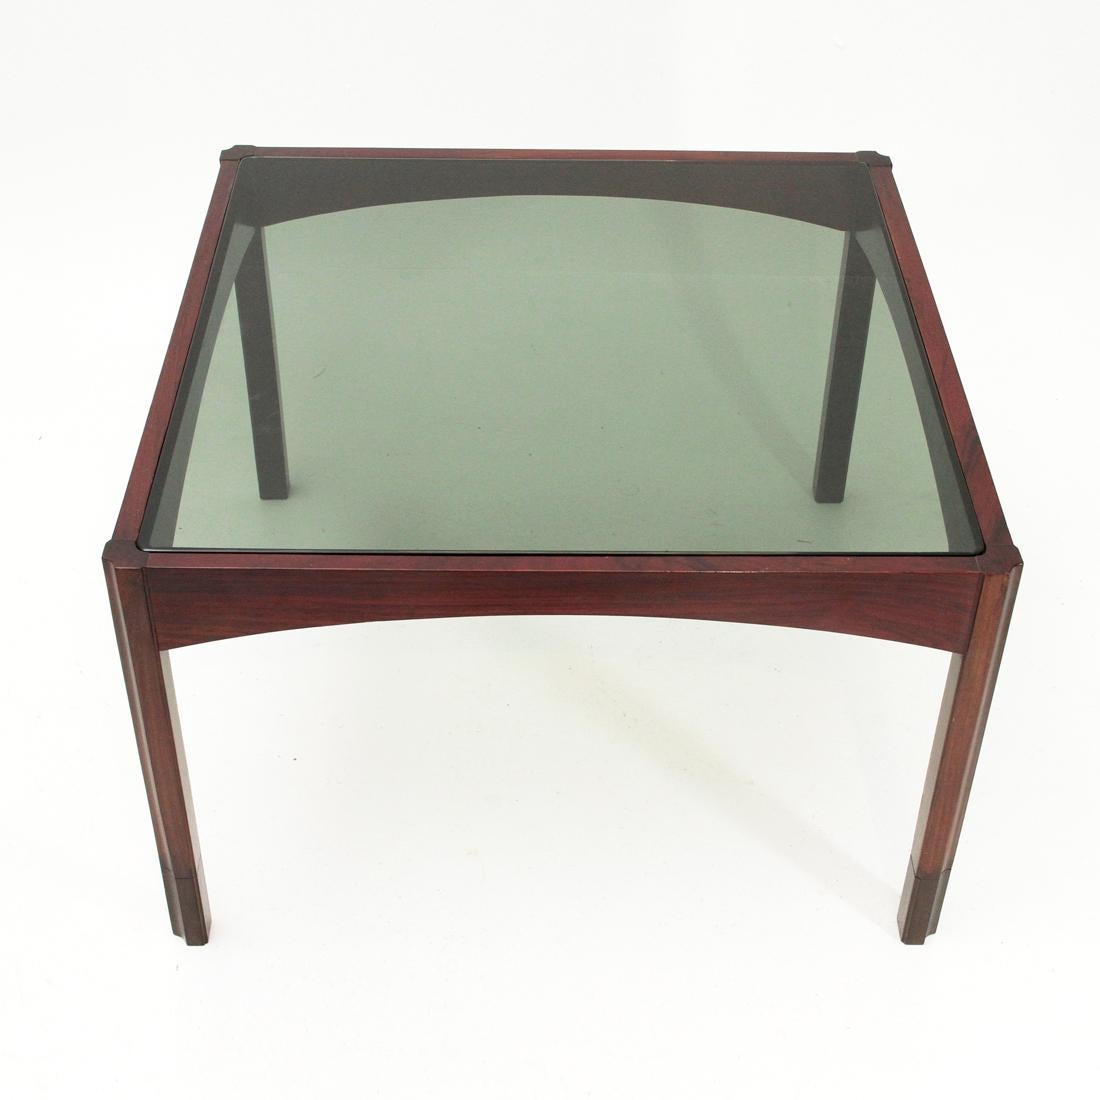 Italian manufacturing table produced in the 1960s. Solid wood frame.
Smoked glass top.
Legs in solid wood with side groove.
Good general conditions, some signs due to normal use over time.

Dimensions: Length 75 cm - depth 75 cm - height 48 cm.